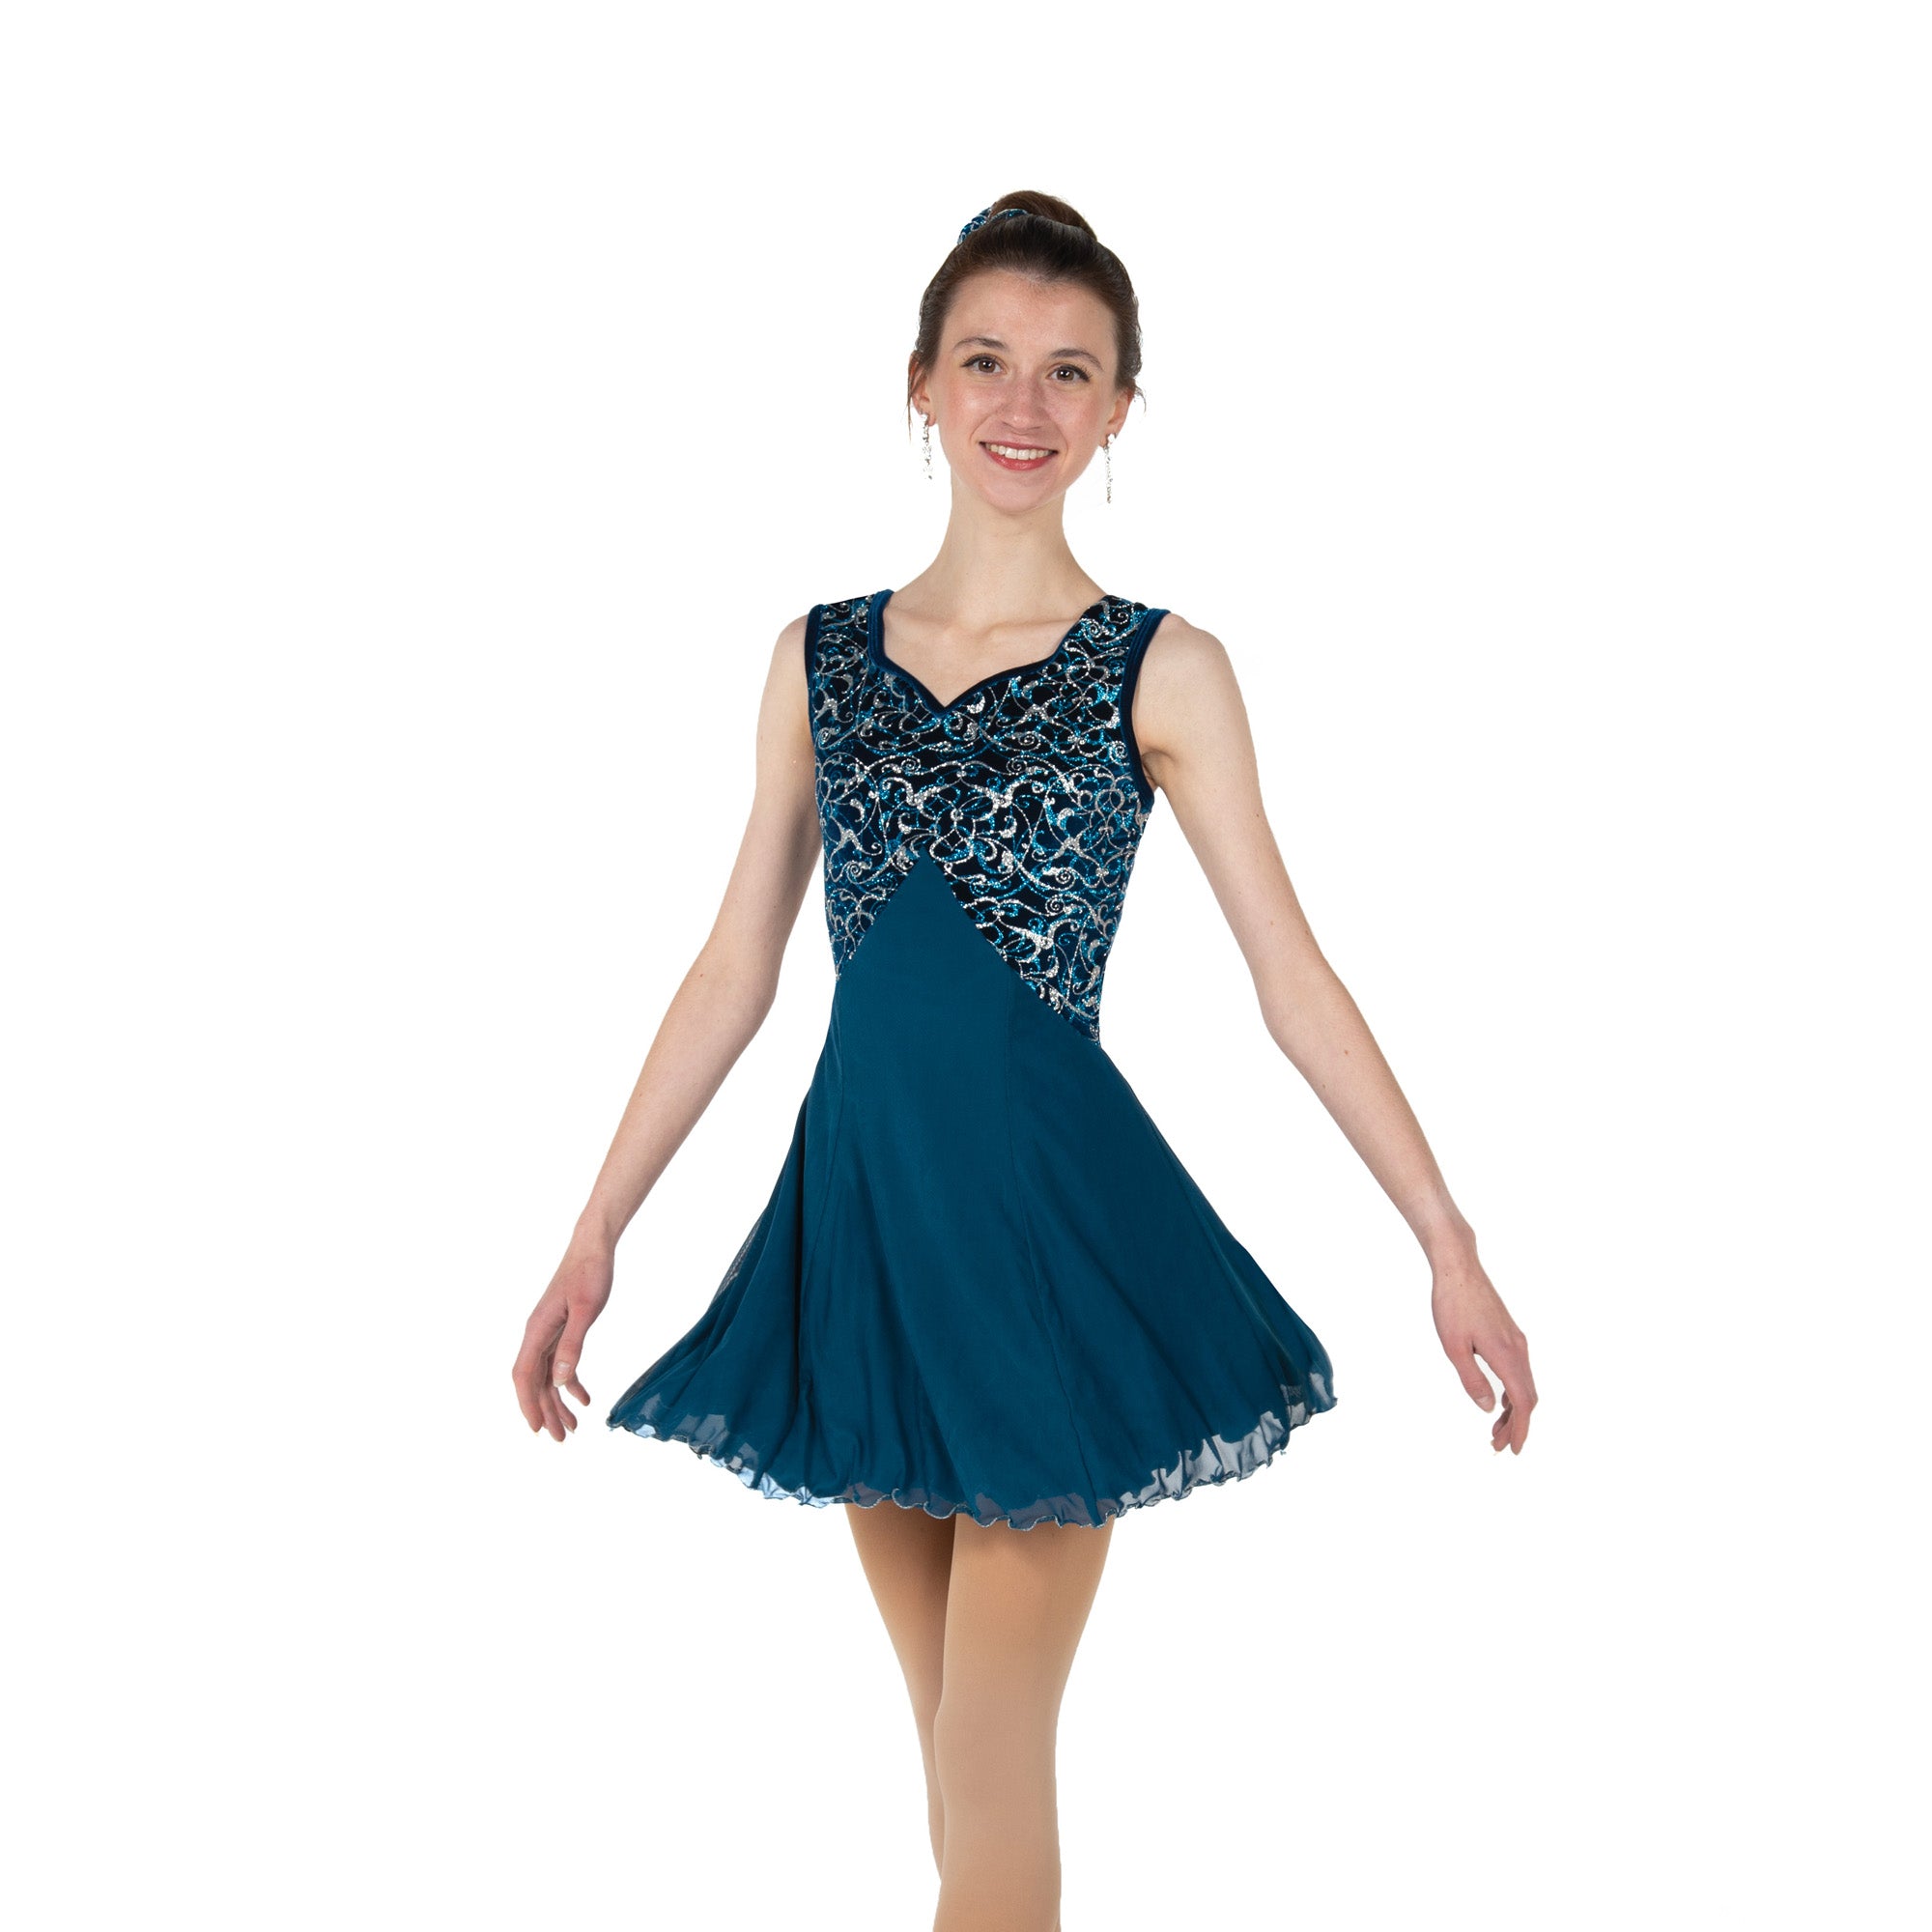 50 Twist of Teal Skating Dress by Jerry's